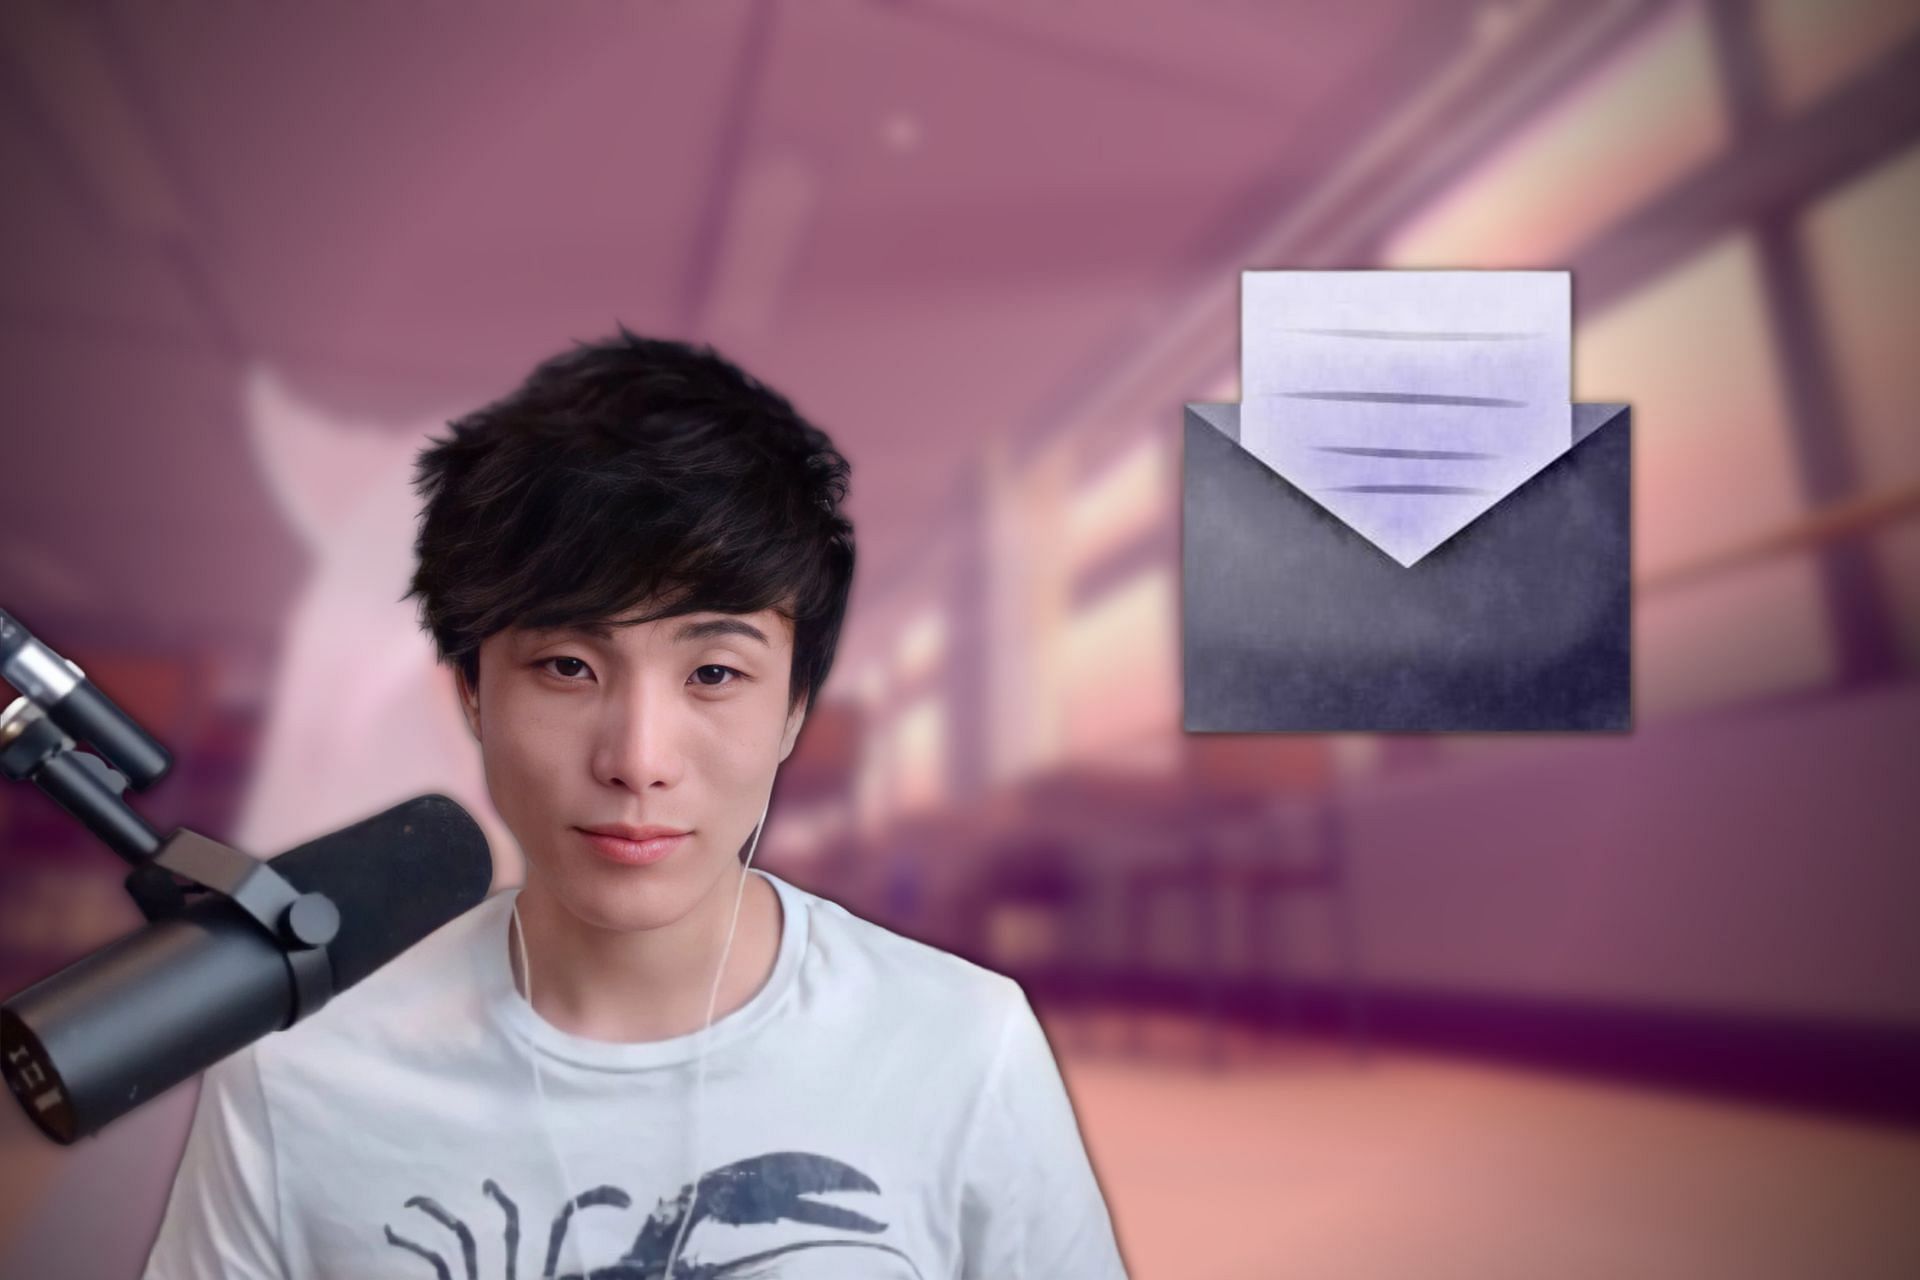 Sykkuno talks about fan mail he received from viewer who unfollowed him (Image via SportsKeeda)